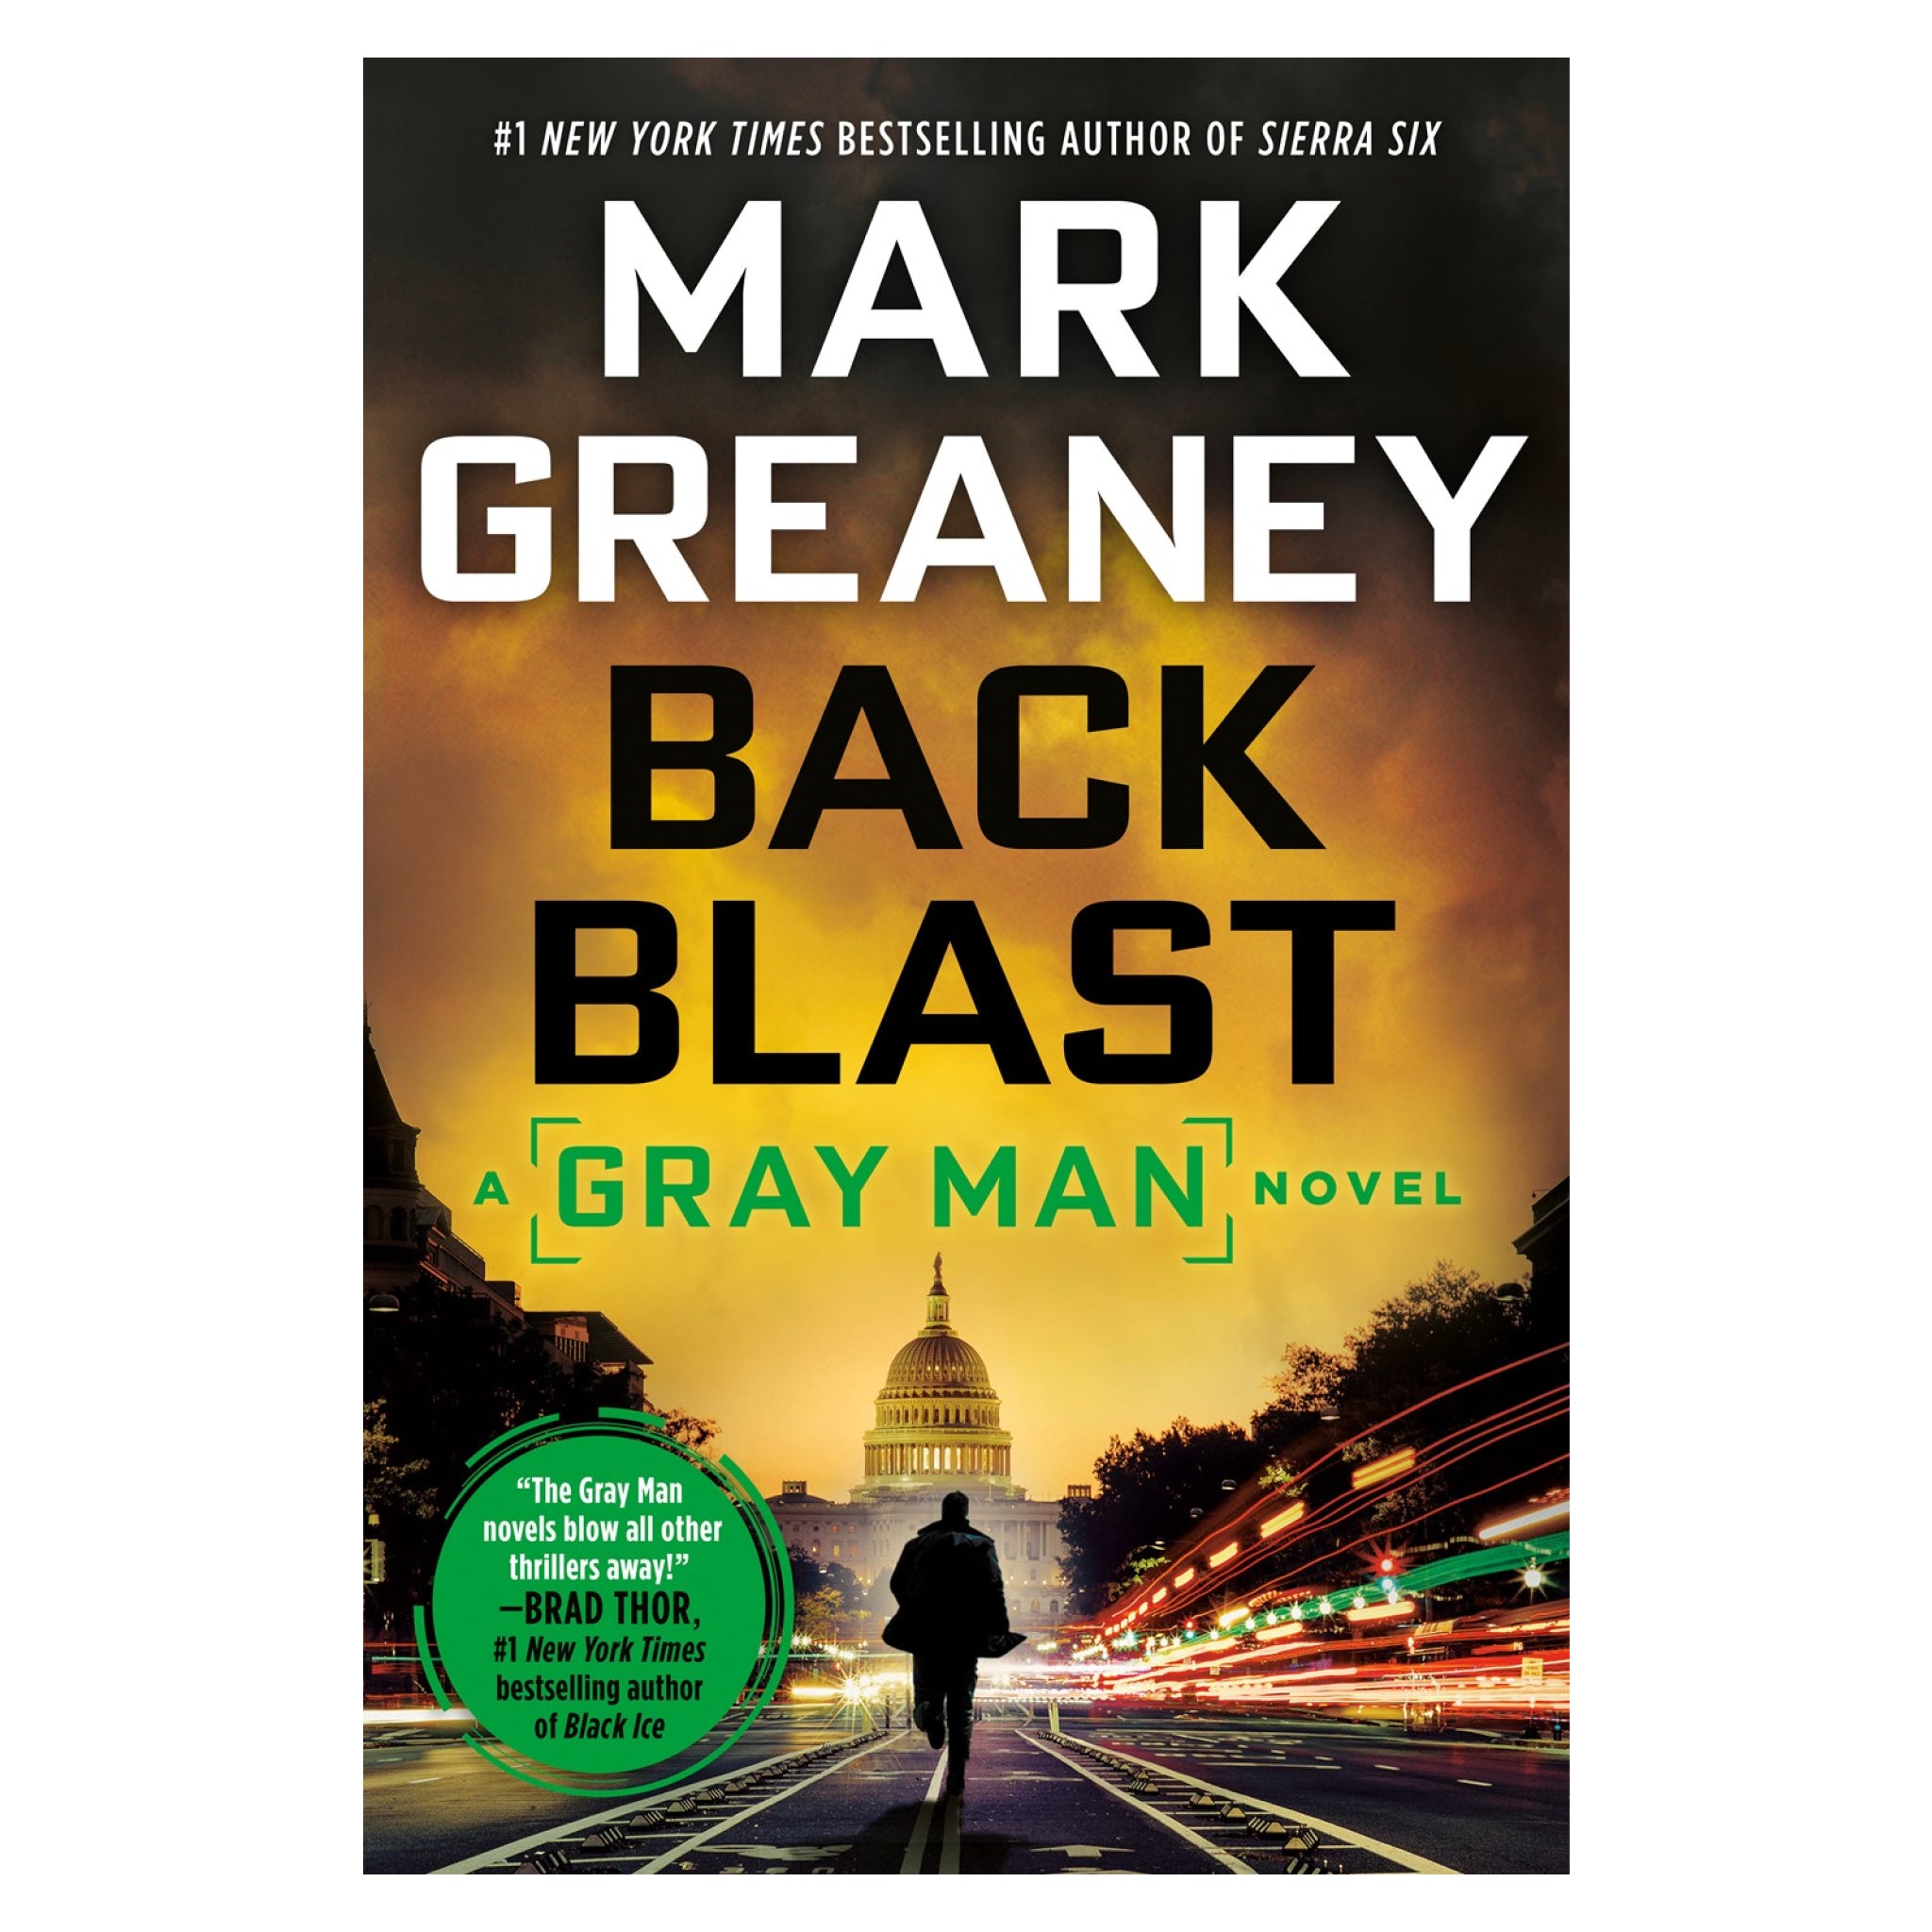 The Gray Man (Gray Man, #1) by Mark Greaney